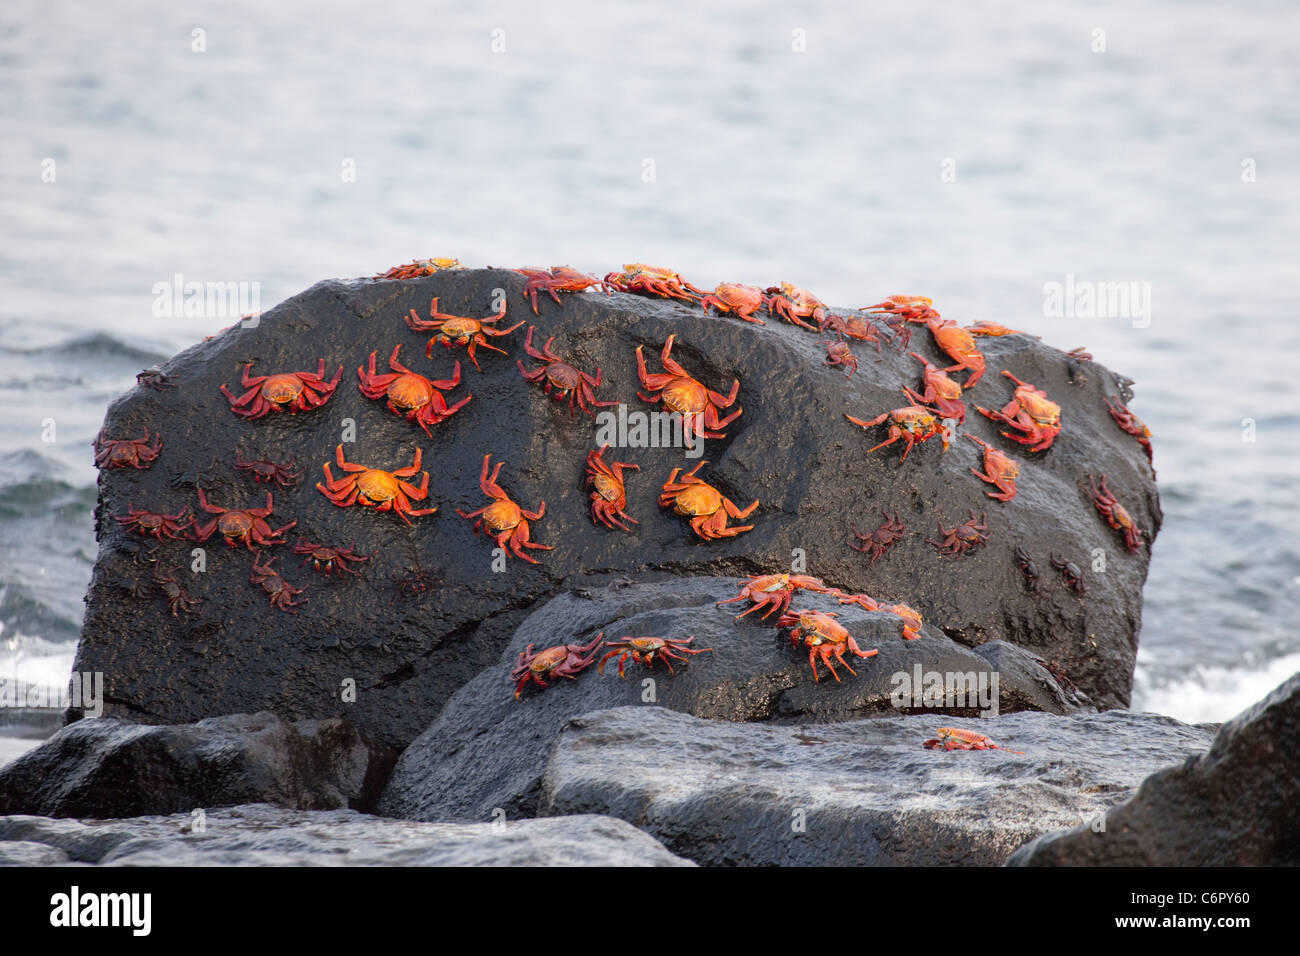 Sally Lightfoot Crab (Grapsus grapsus) gripping lava rock in intertidal zone in Galapagos National Park Stock Photo